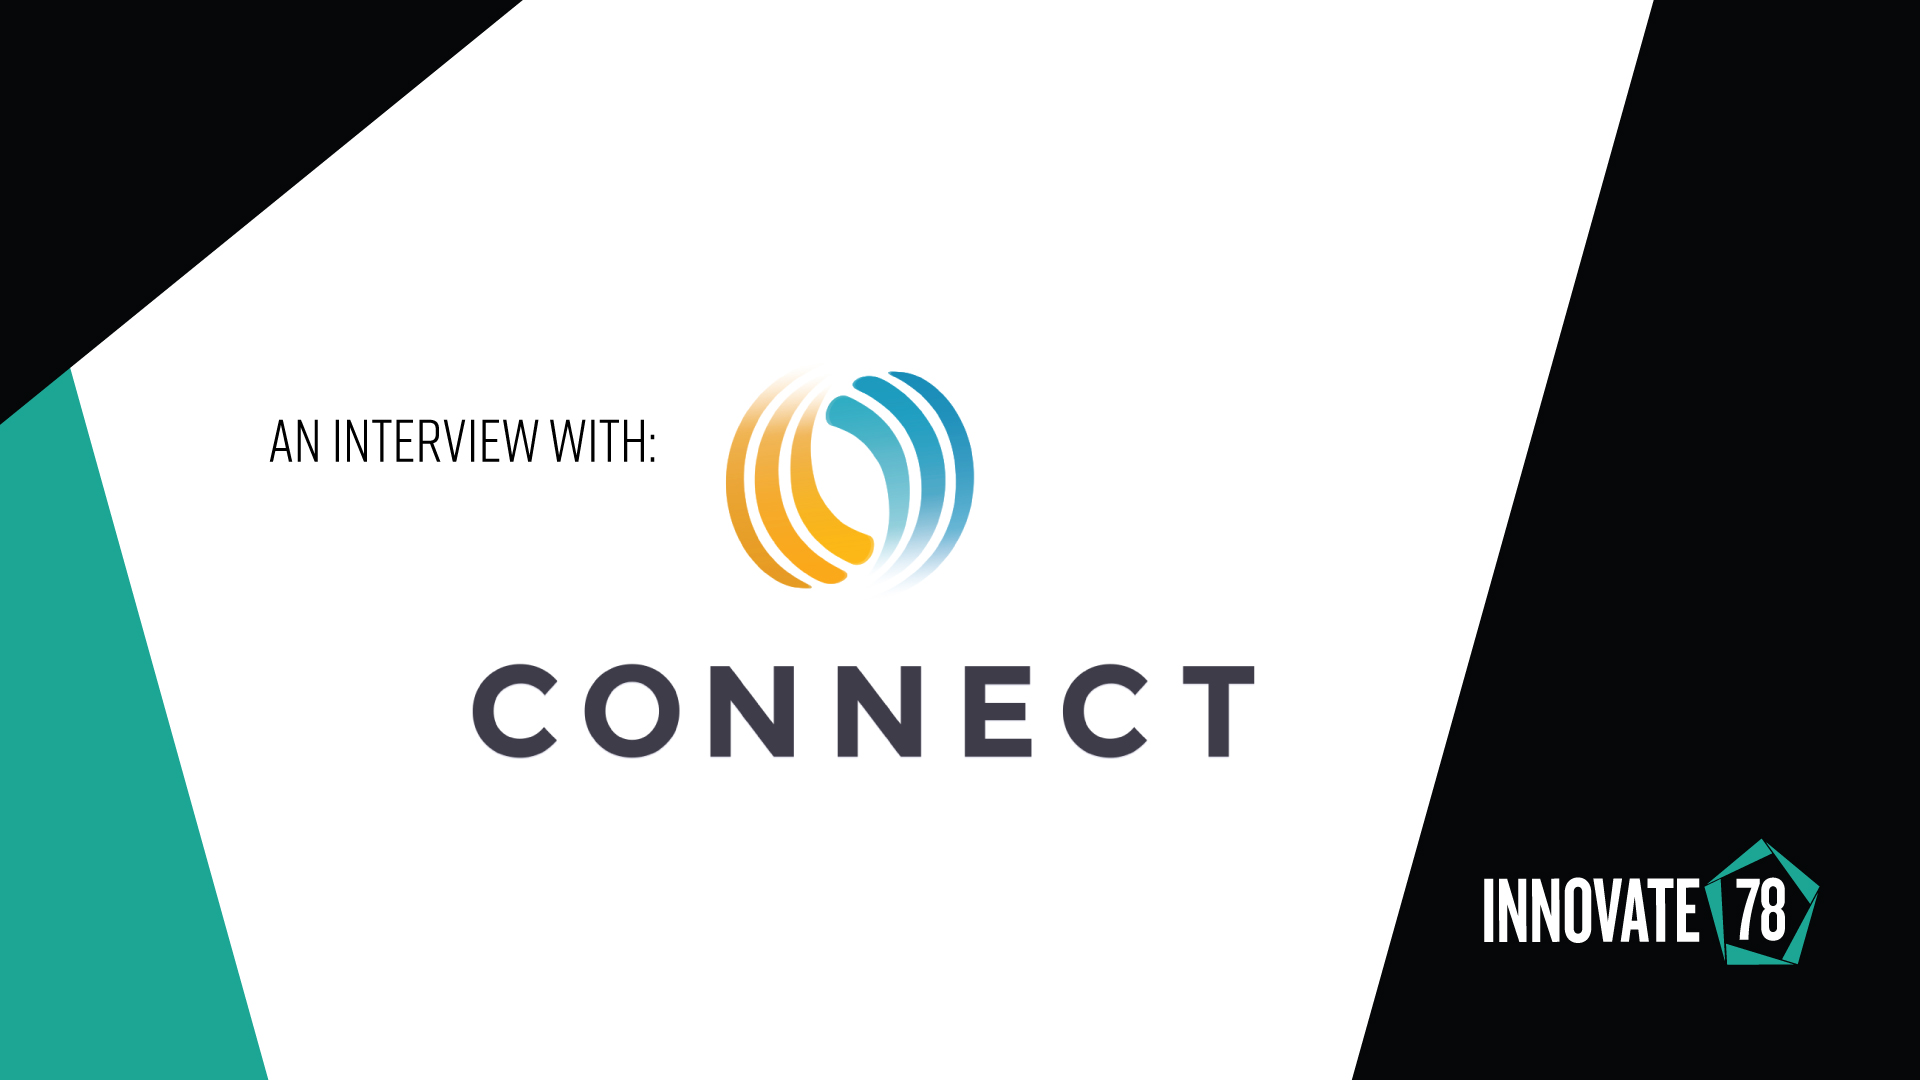 Connect-ing with Christie Marcella, chief operating office at Connect San Diego